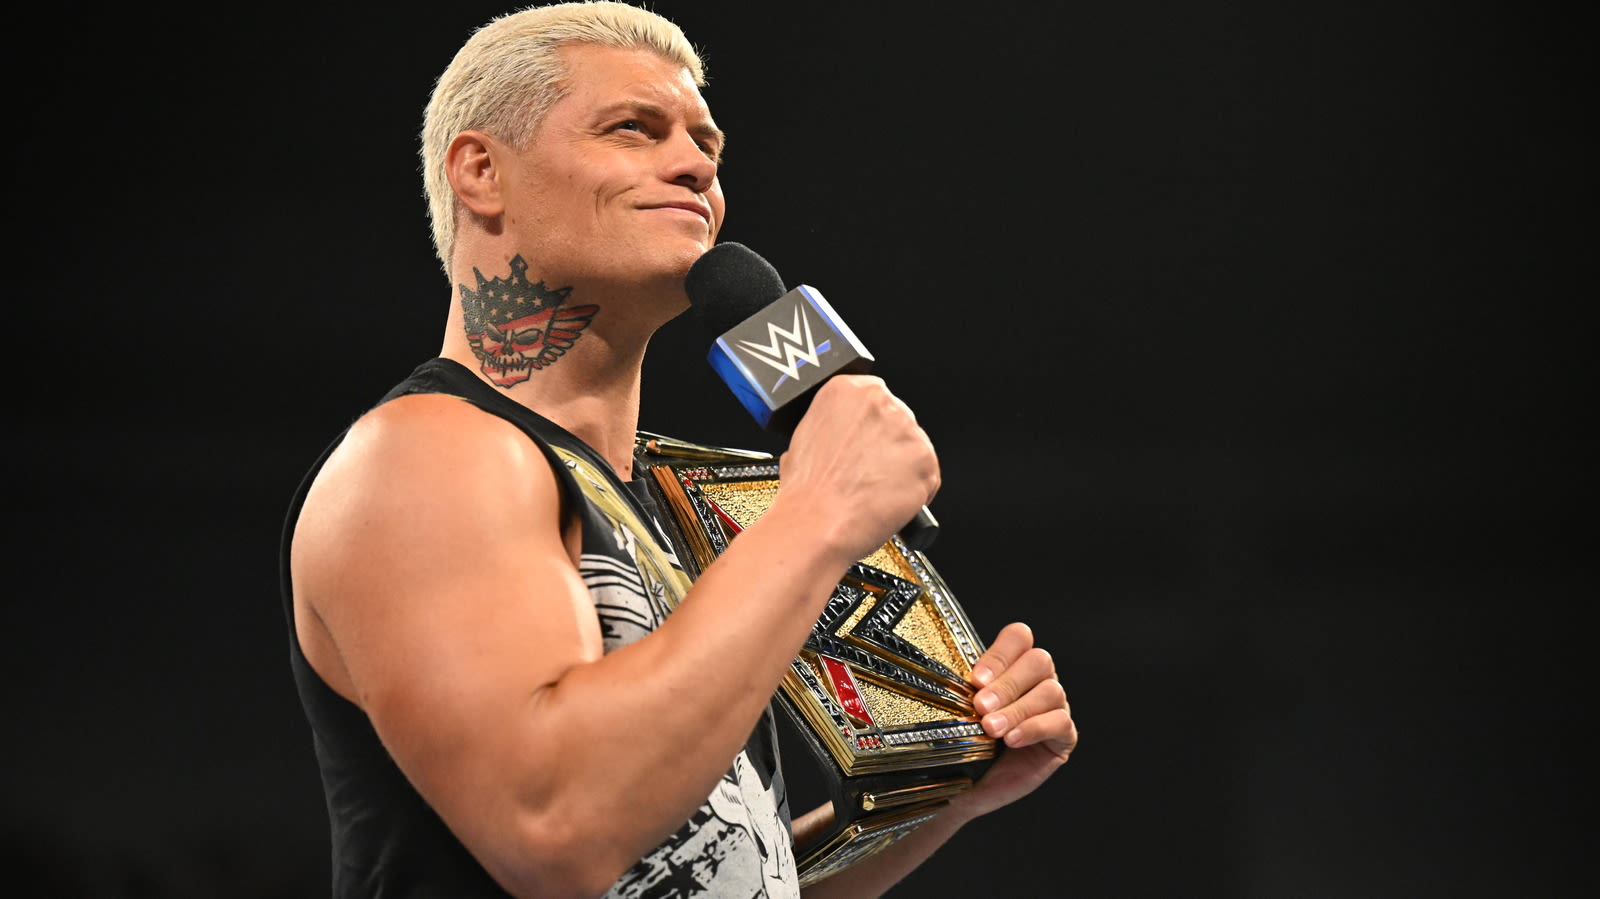 WWE SmackDown Live Coverage 8/2 - Cody Rhodes & Solo Sikoa Meet In The Ring, Two Tag Team Title Matches